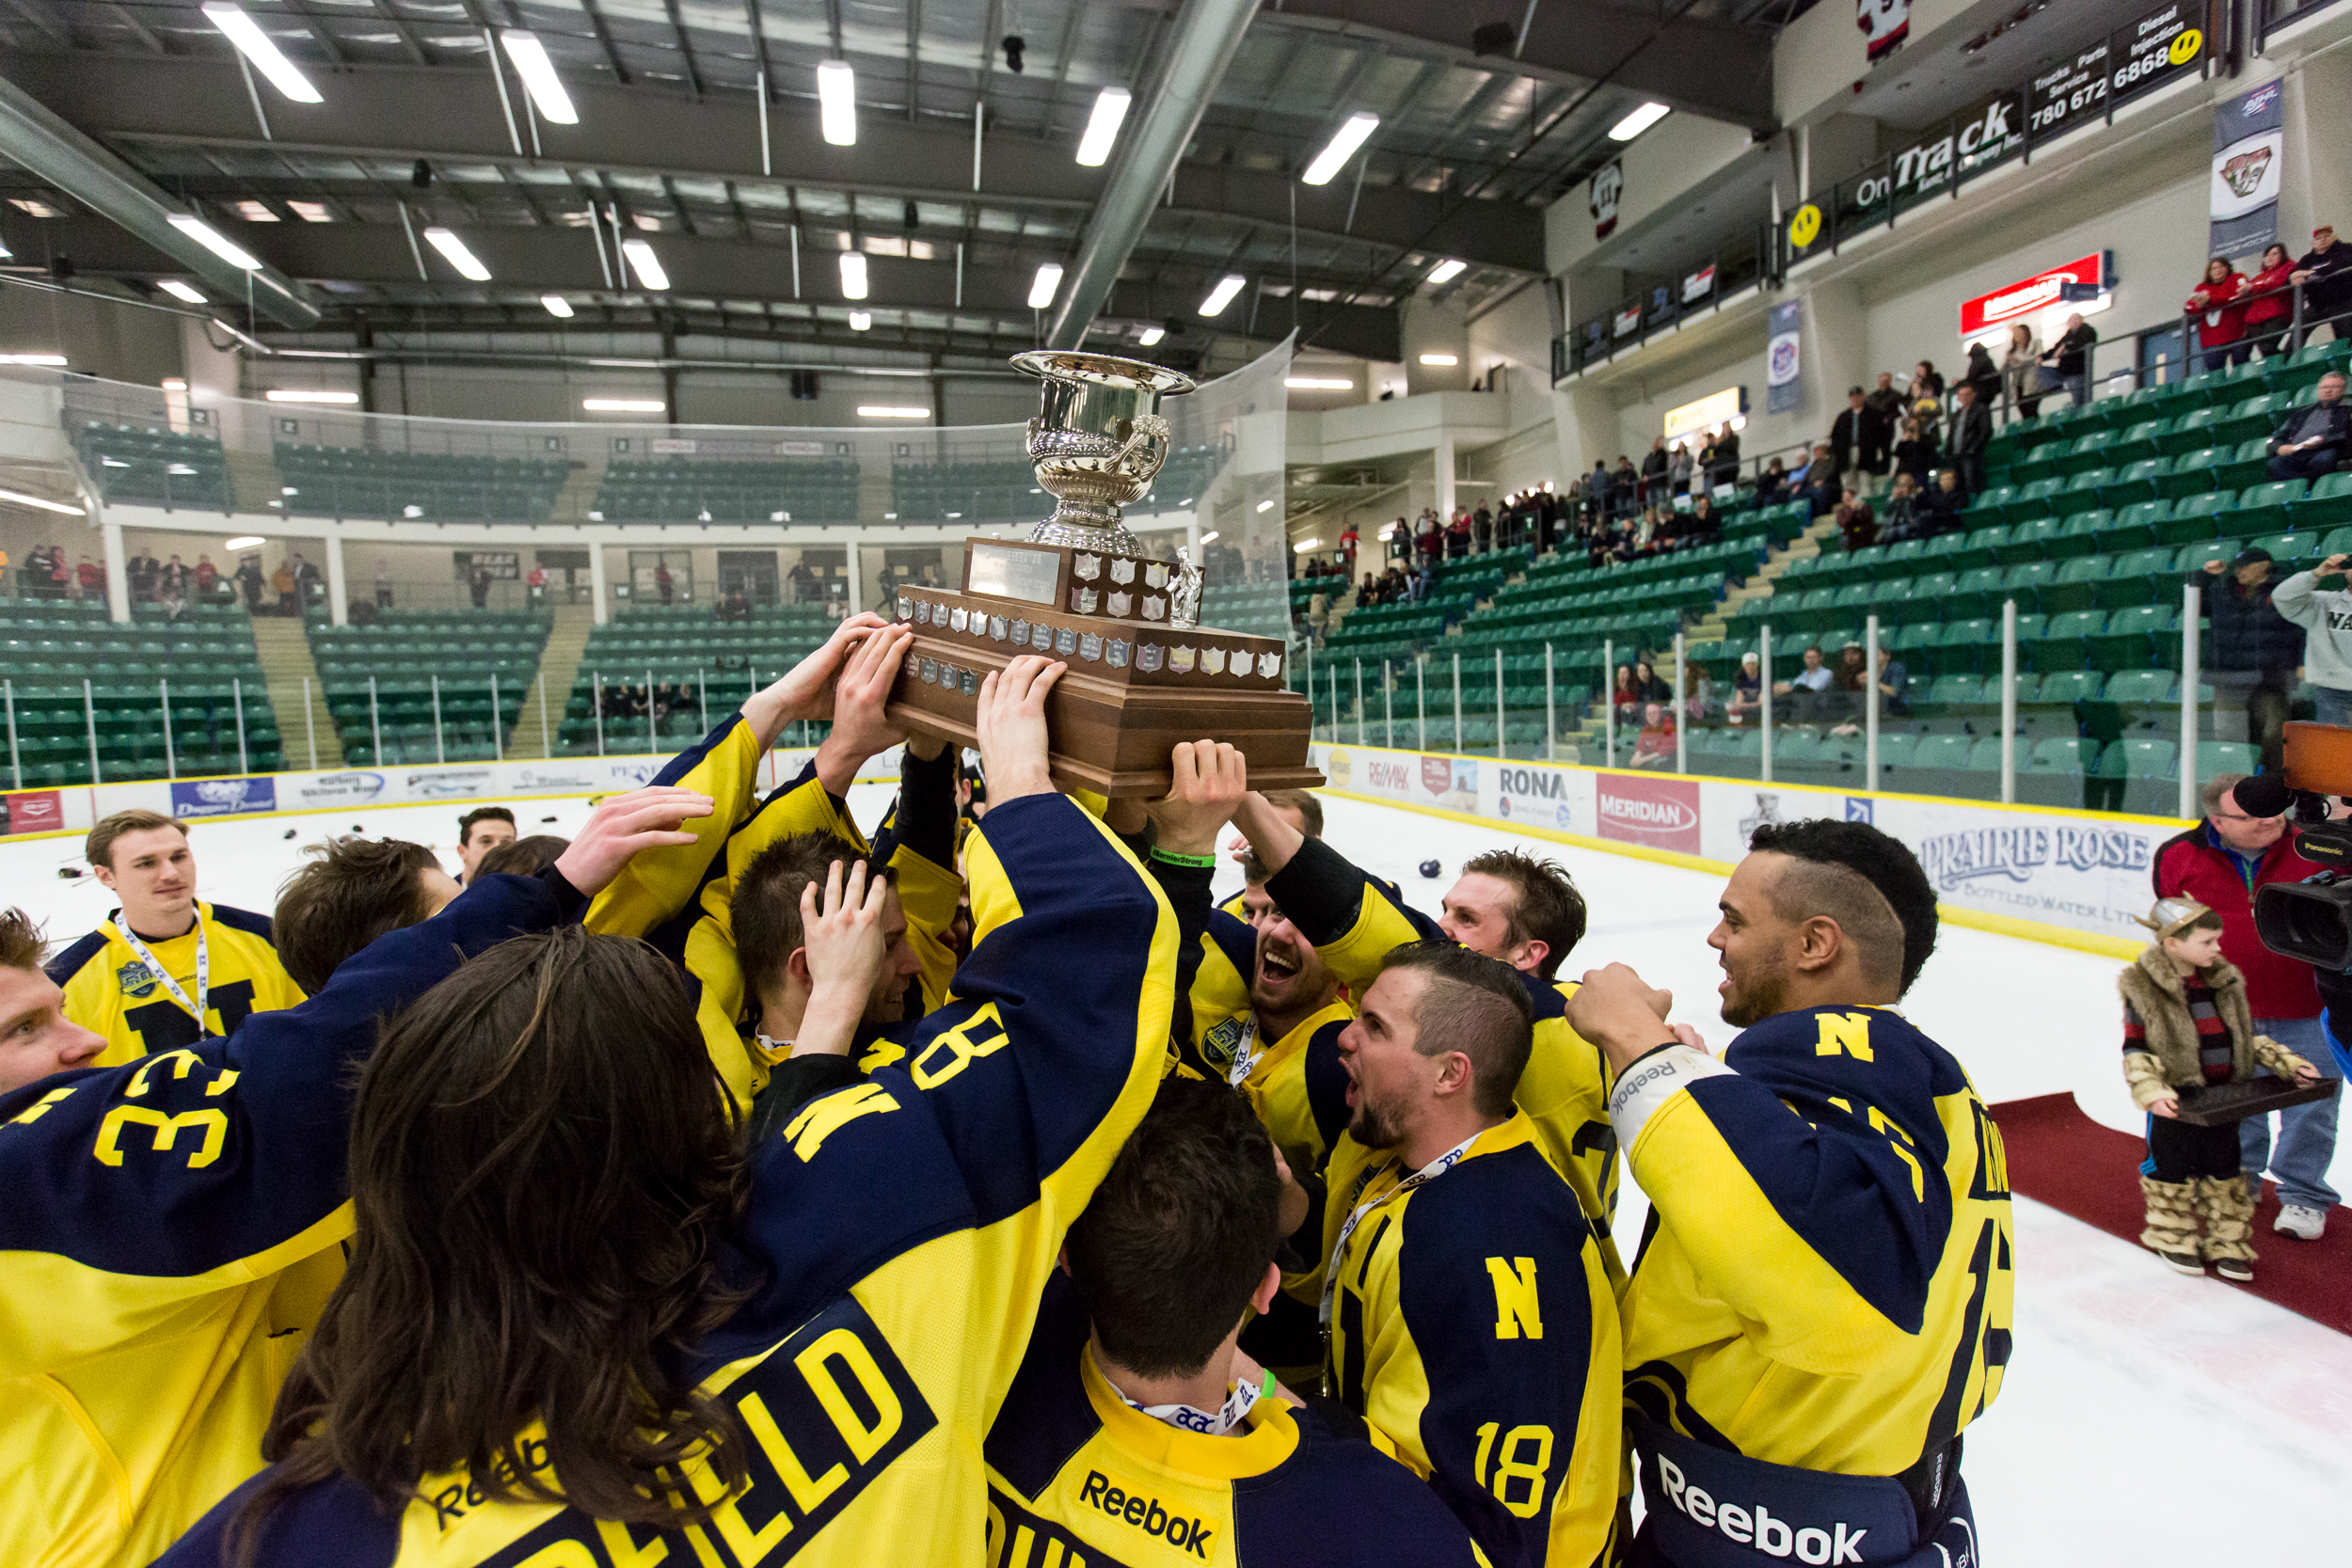 Perfect ending for Ooks hockey